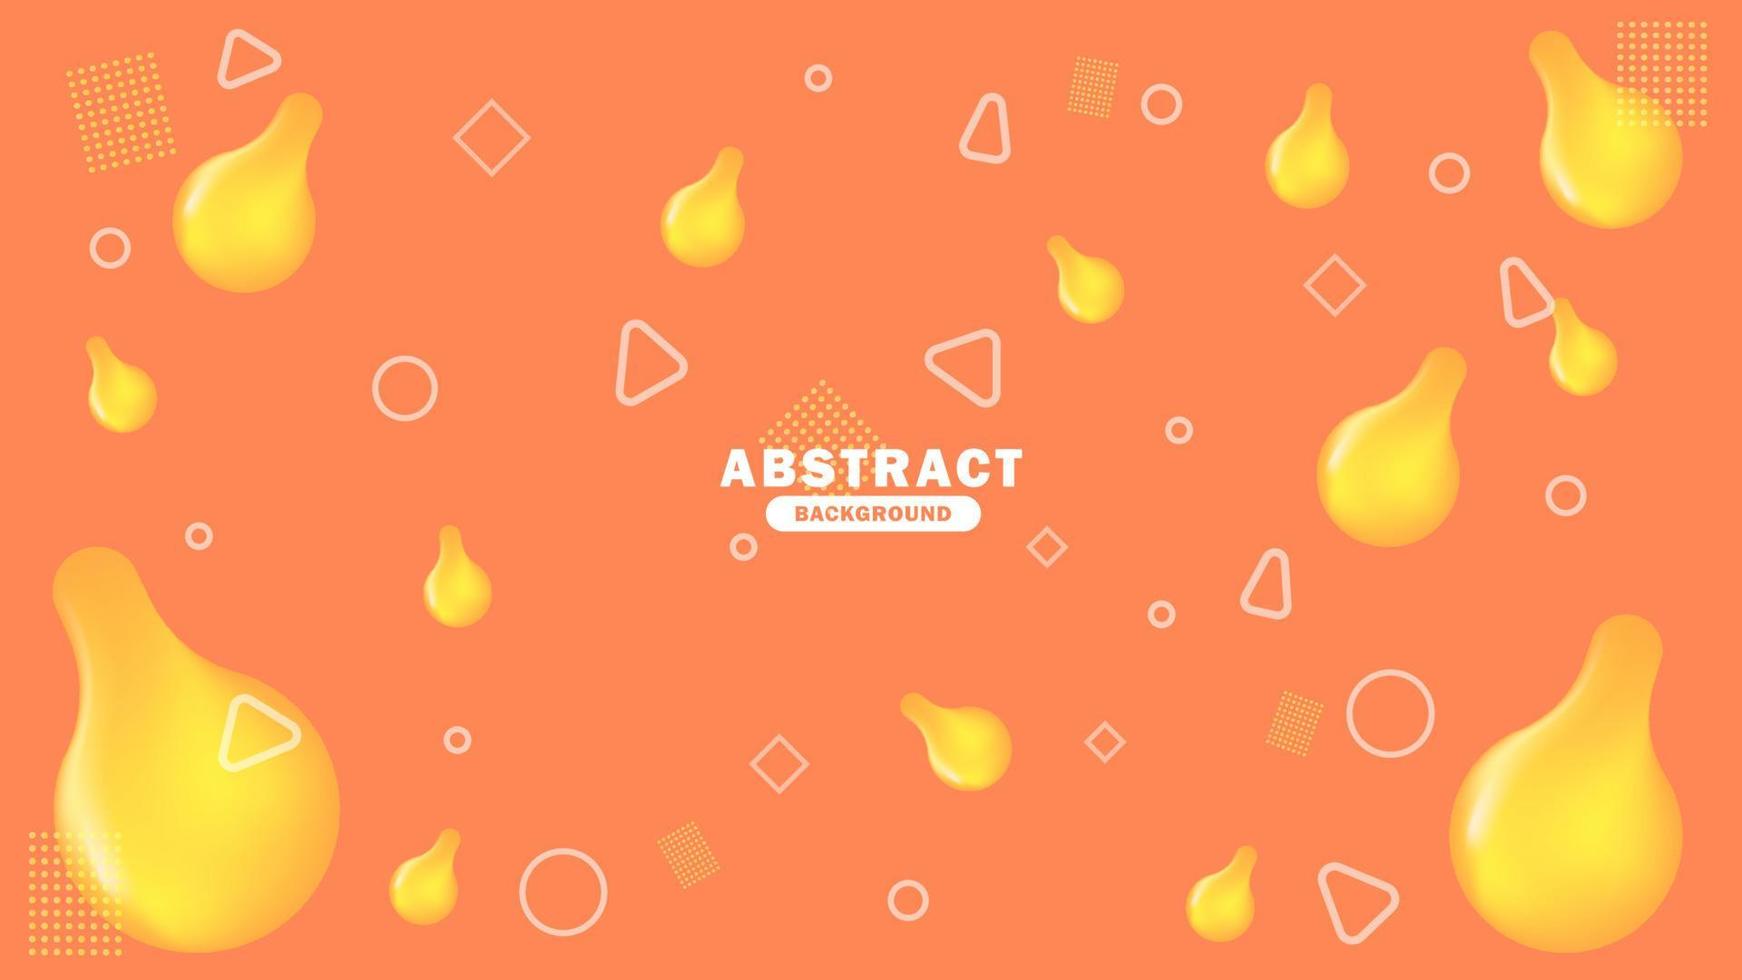 Abstract background template with lemon vector